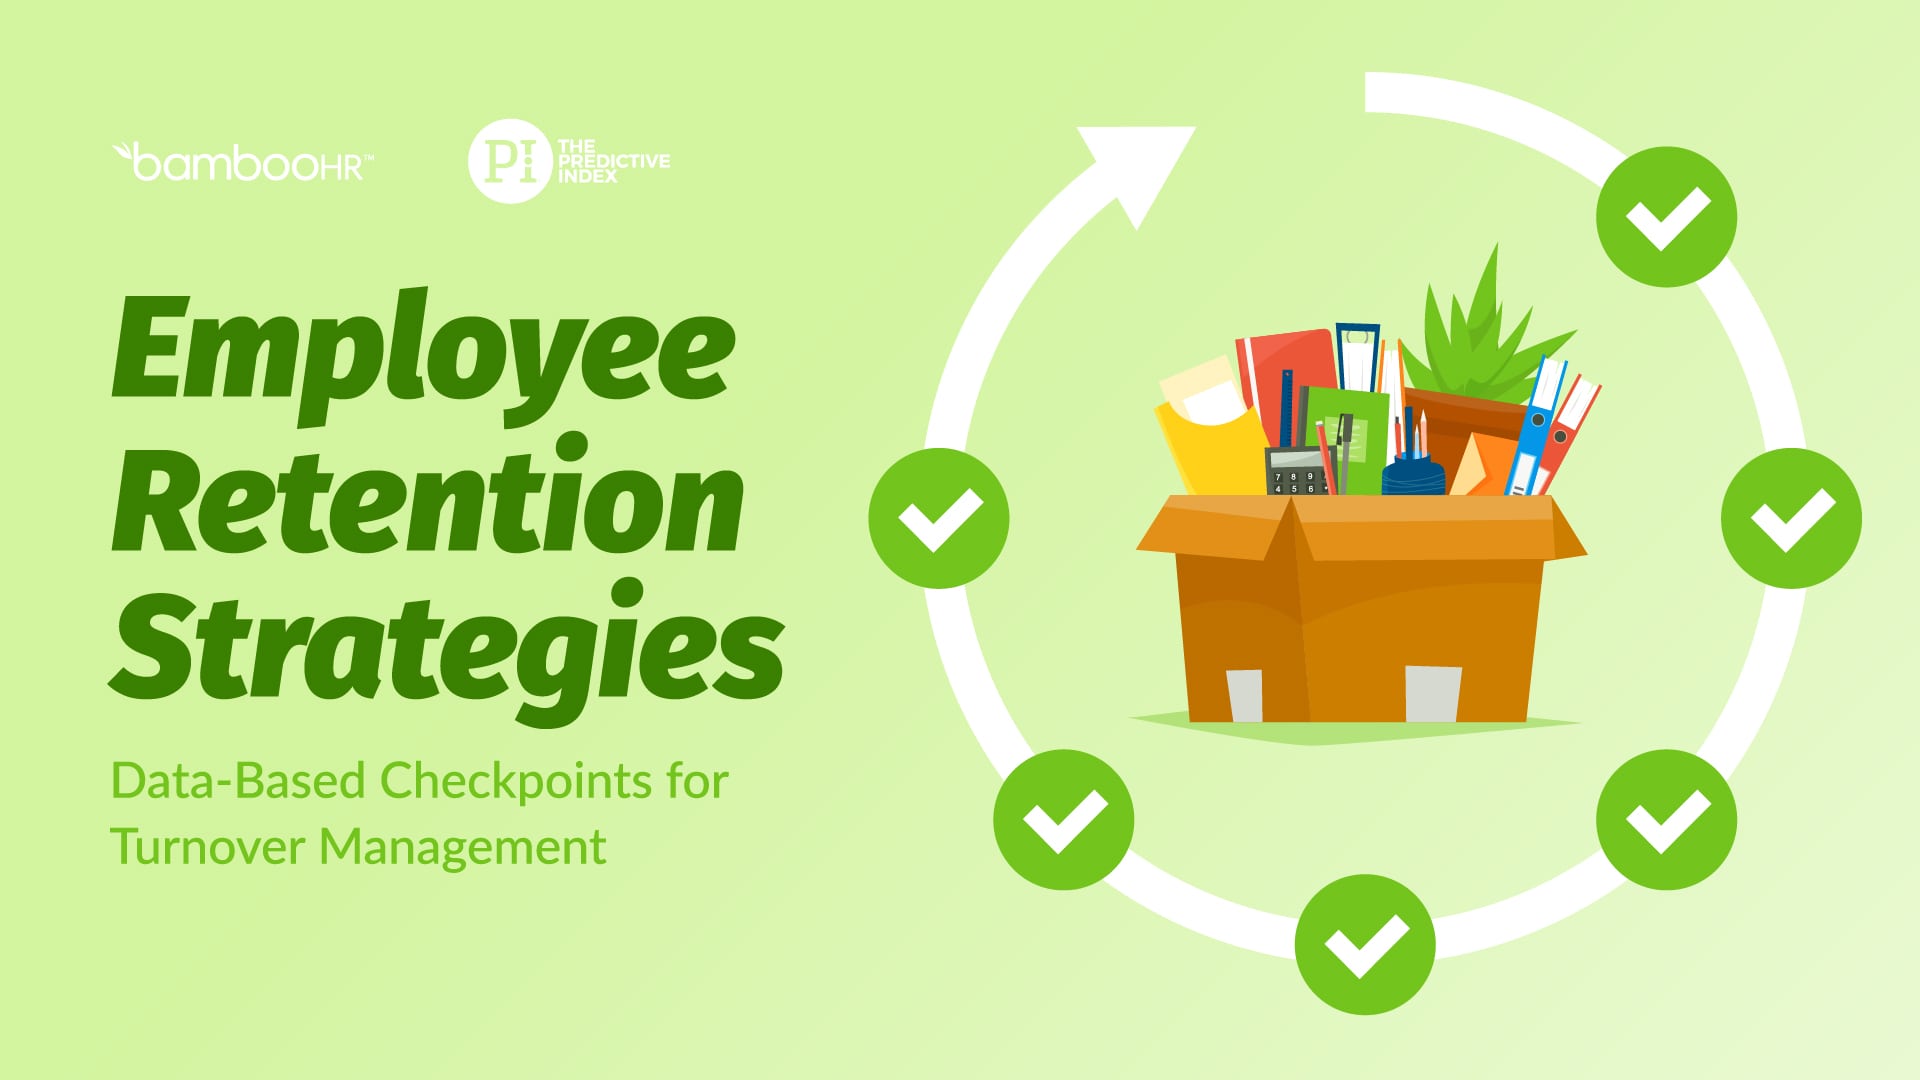 Employee Retention Strategies: Data-Based Checkpoints for Turnover Managements